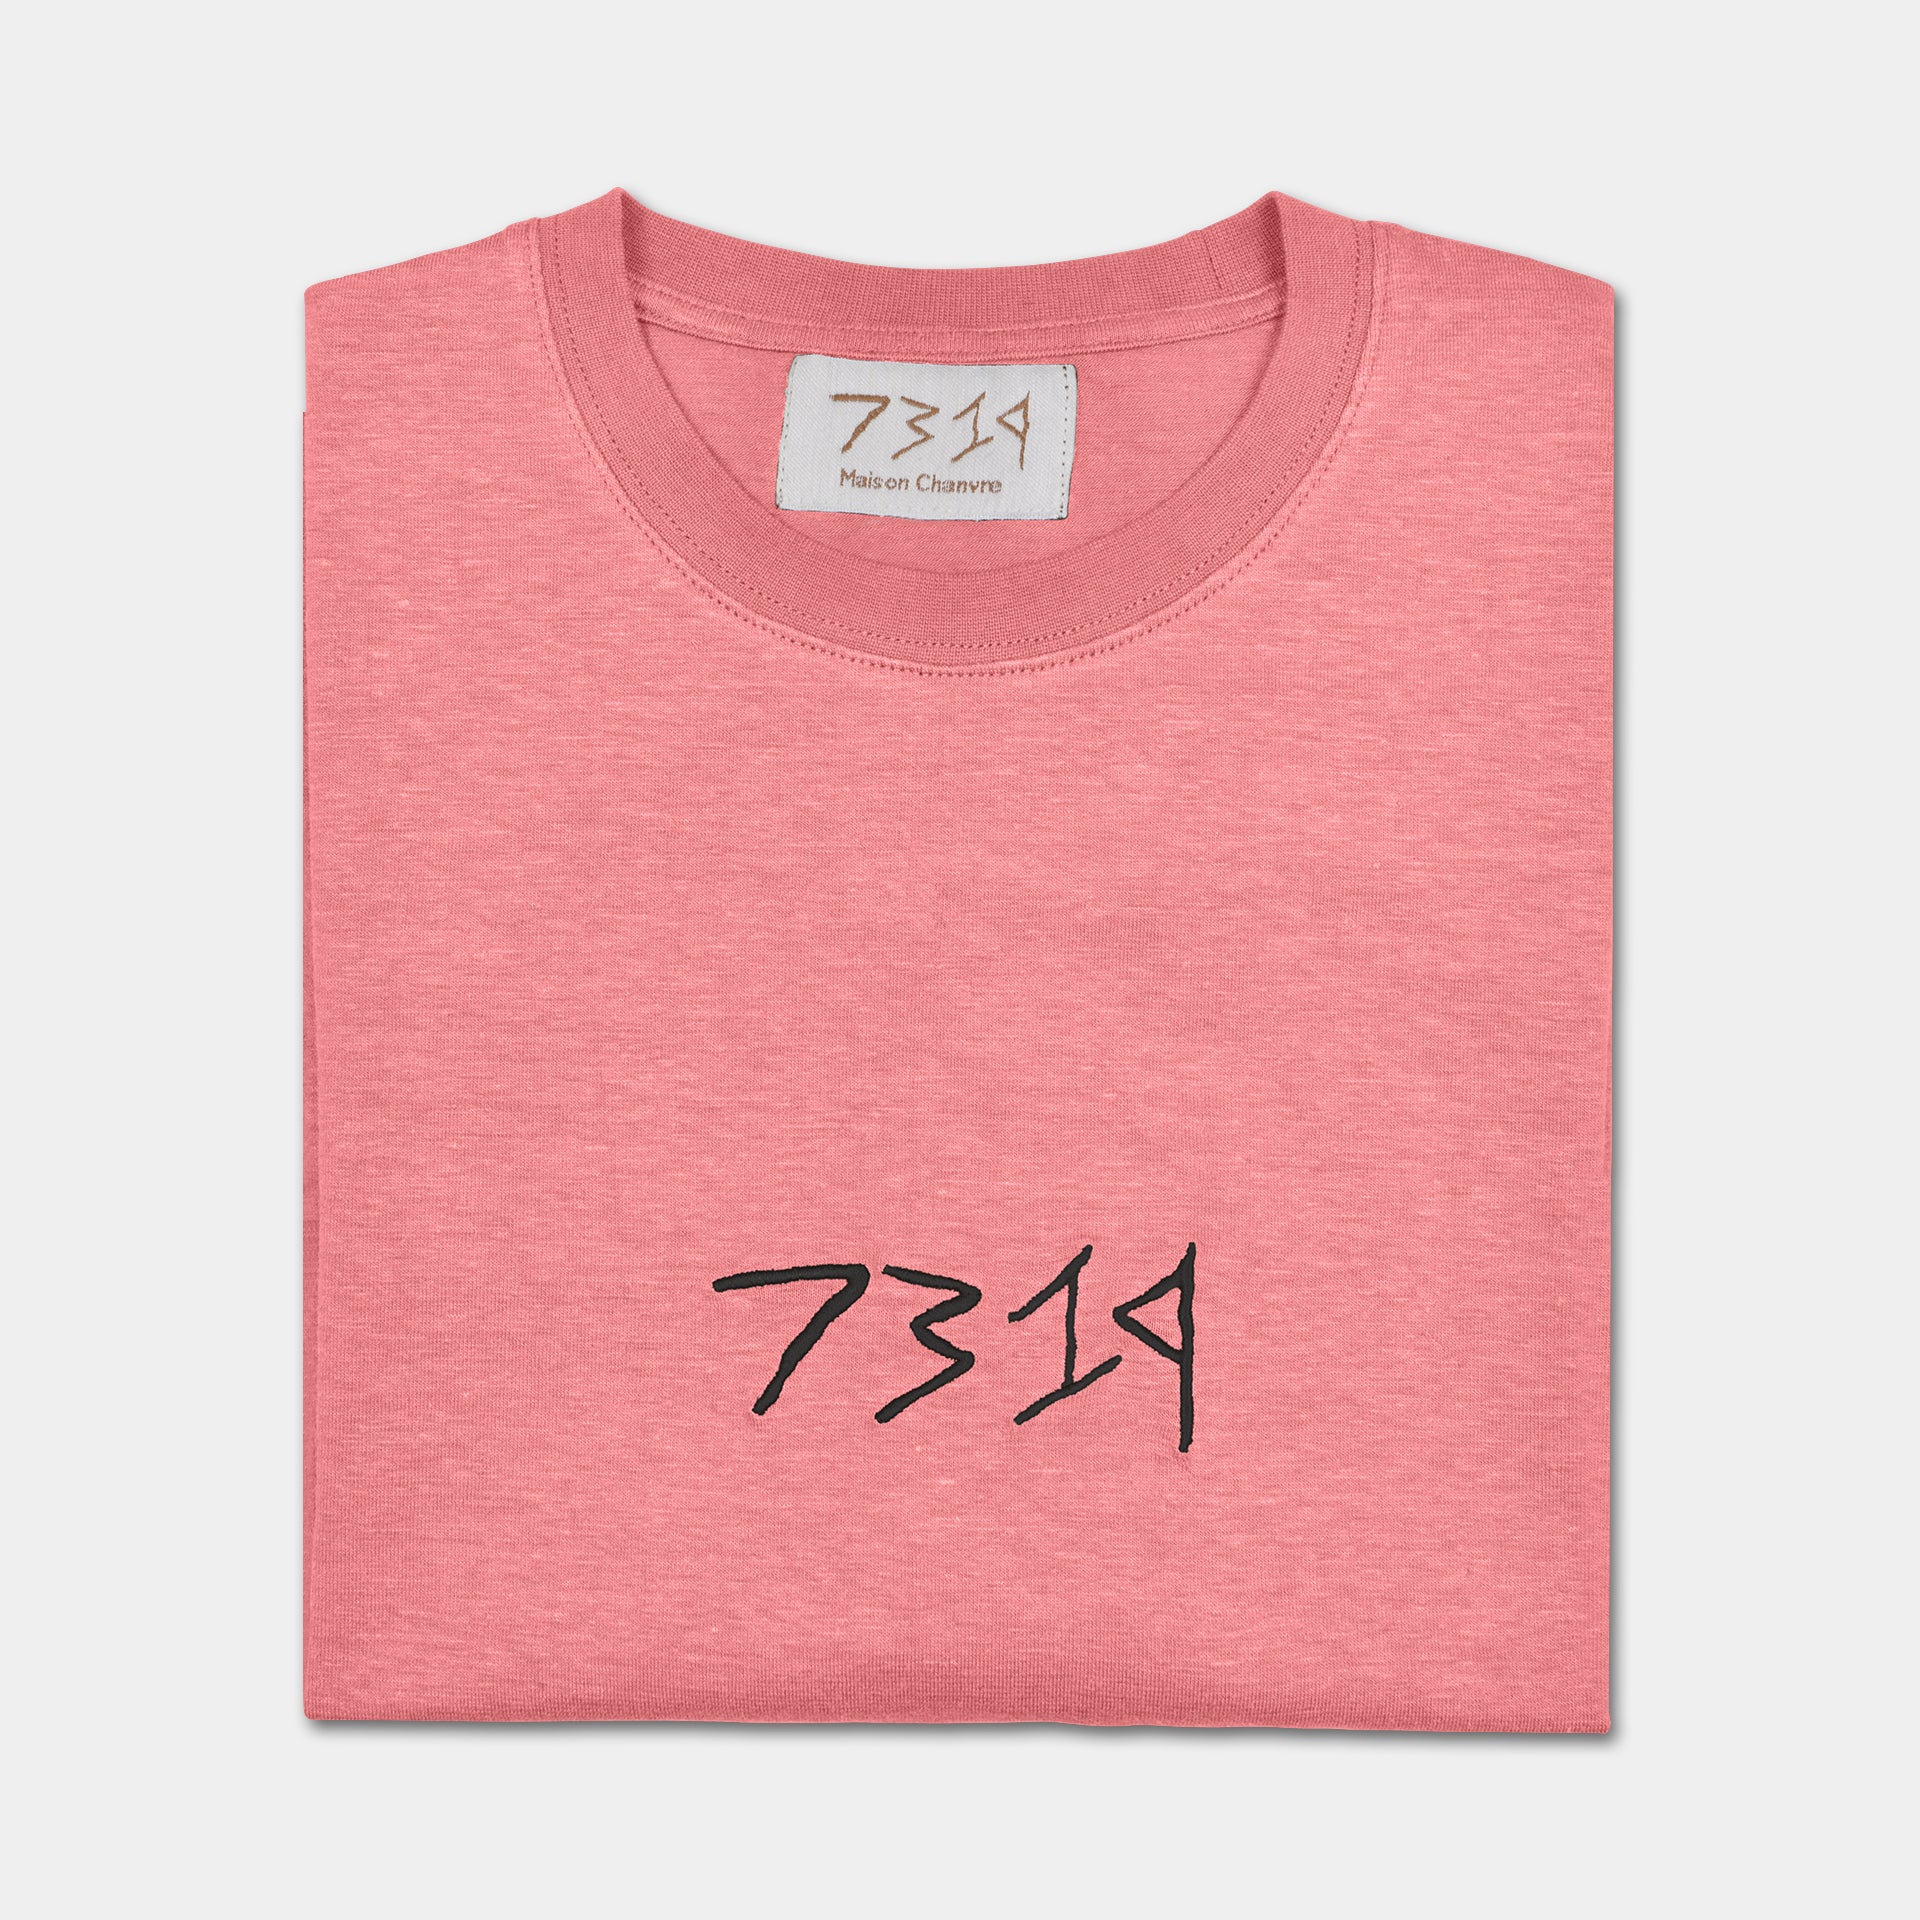  Pink 7319 t-shirt front shot with label, folded